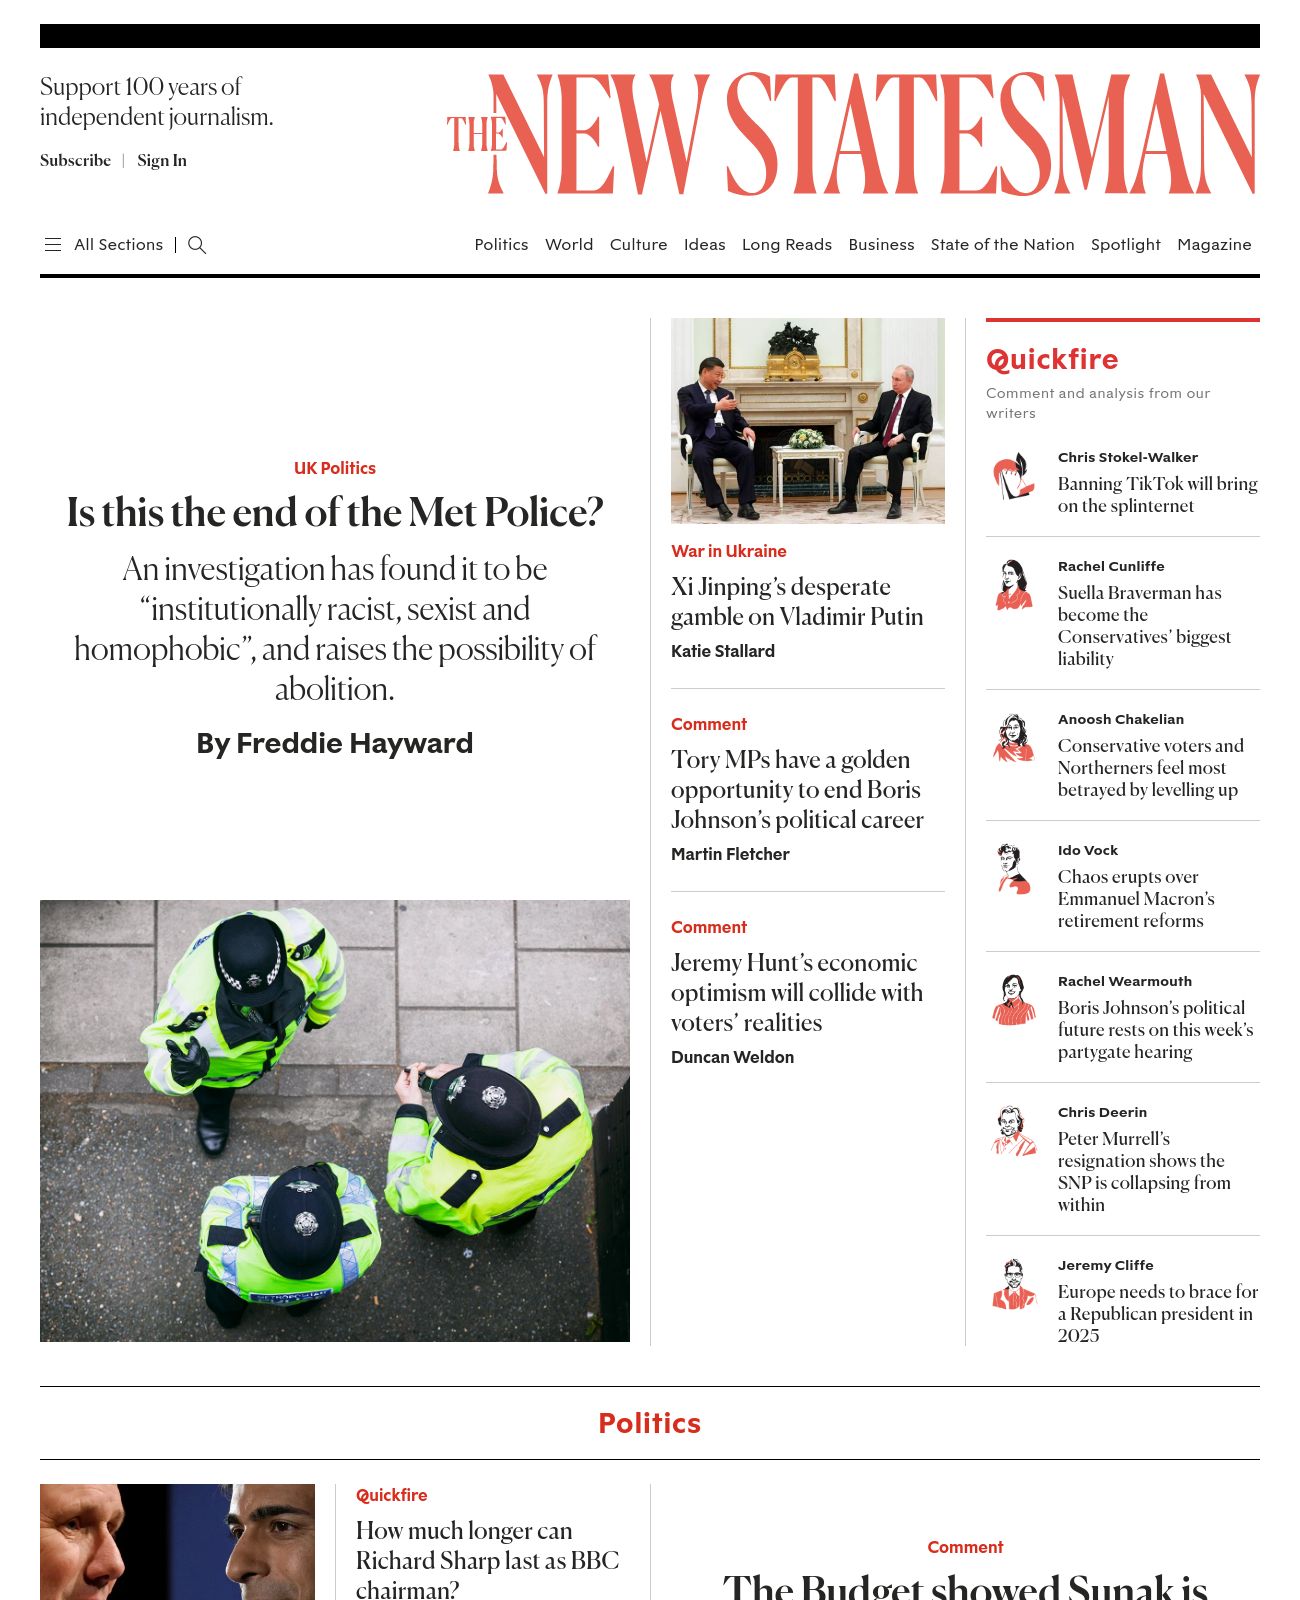 New Statesman at 2023-03-21 11:41:13+00:00 local time